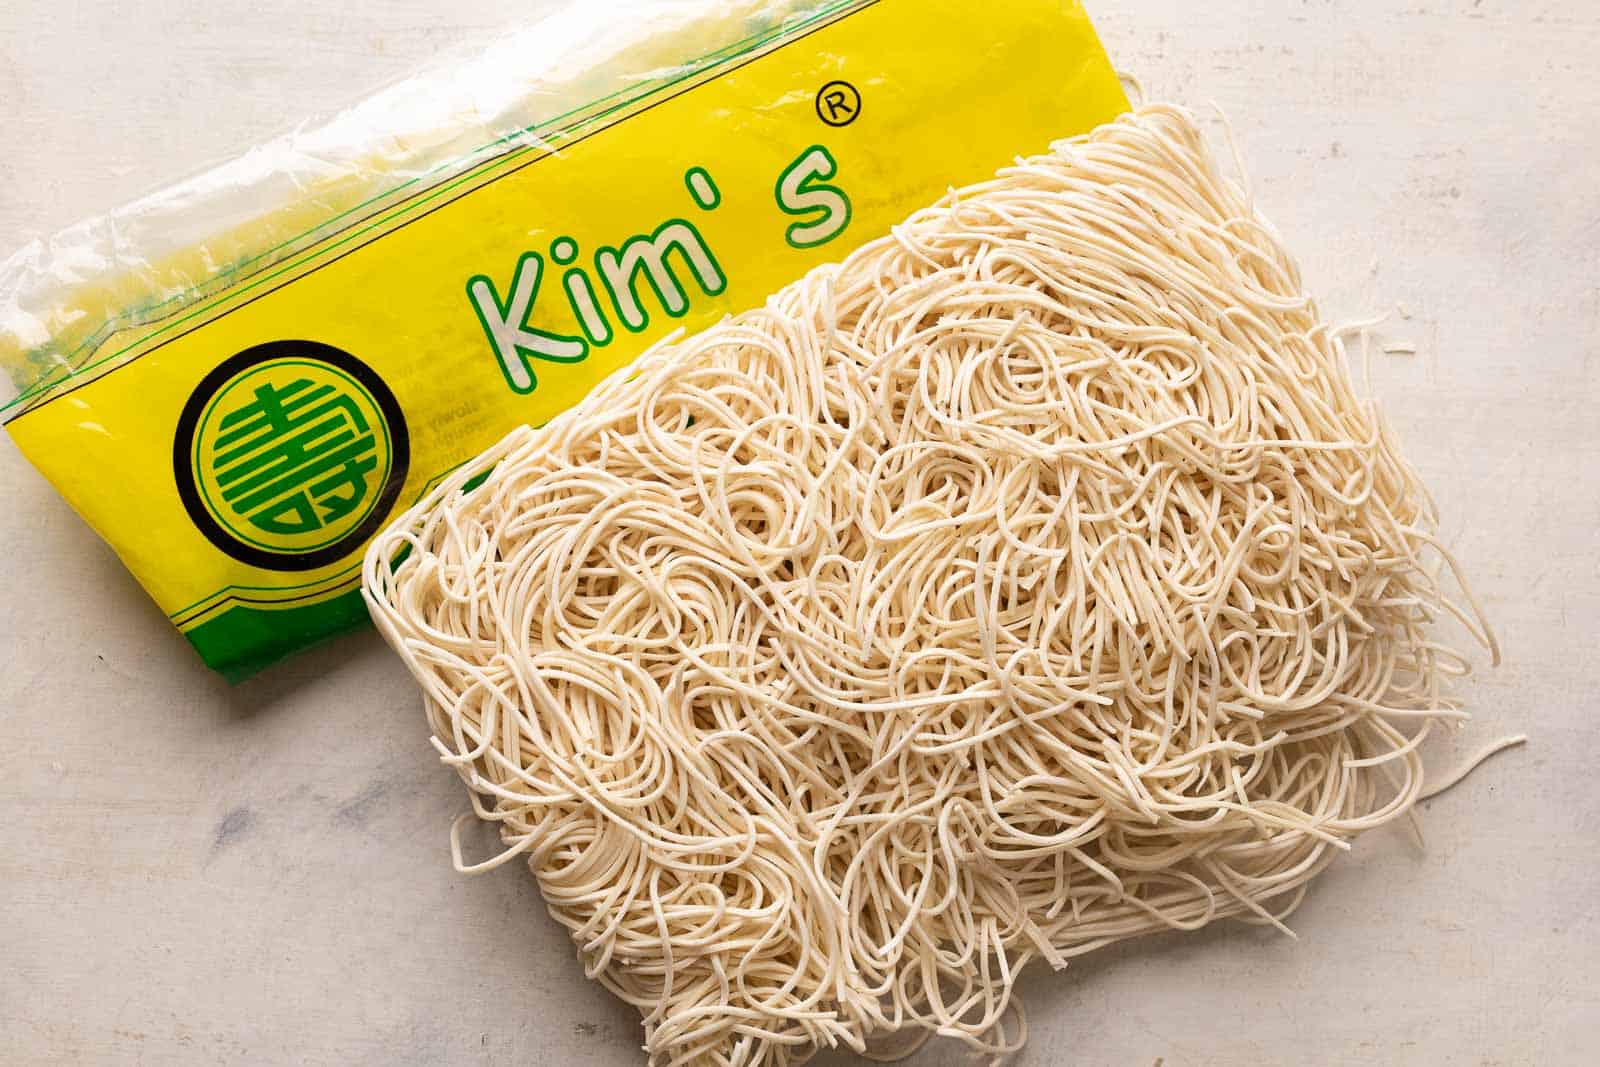 Picture of noodles and noodle brand I use for chow mein